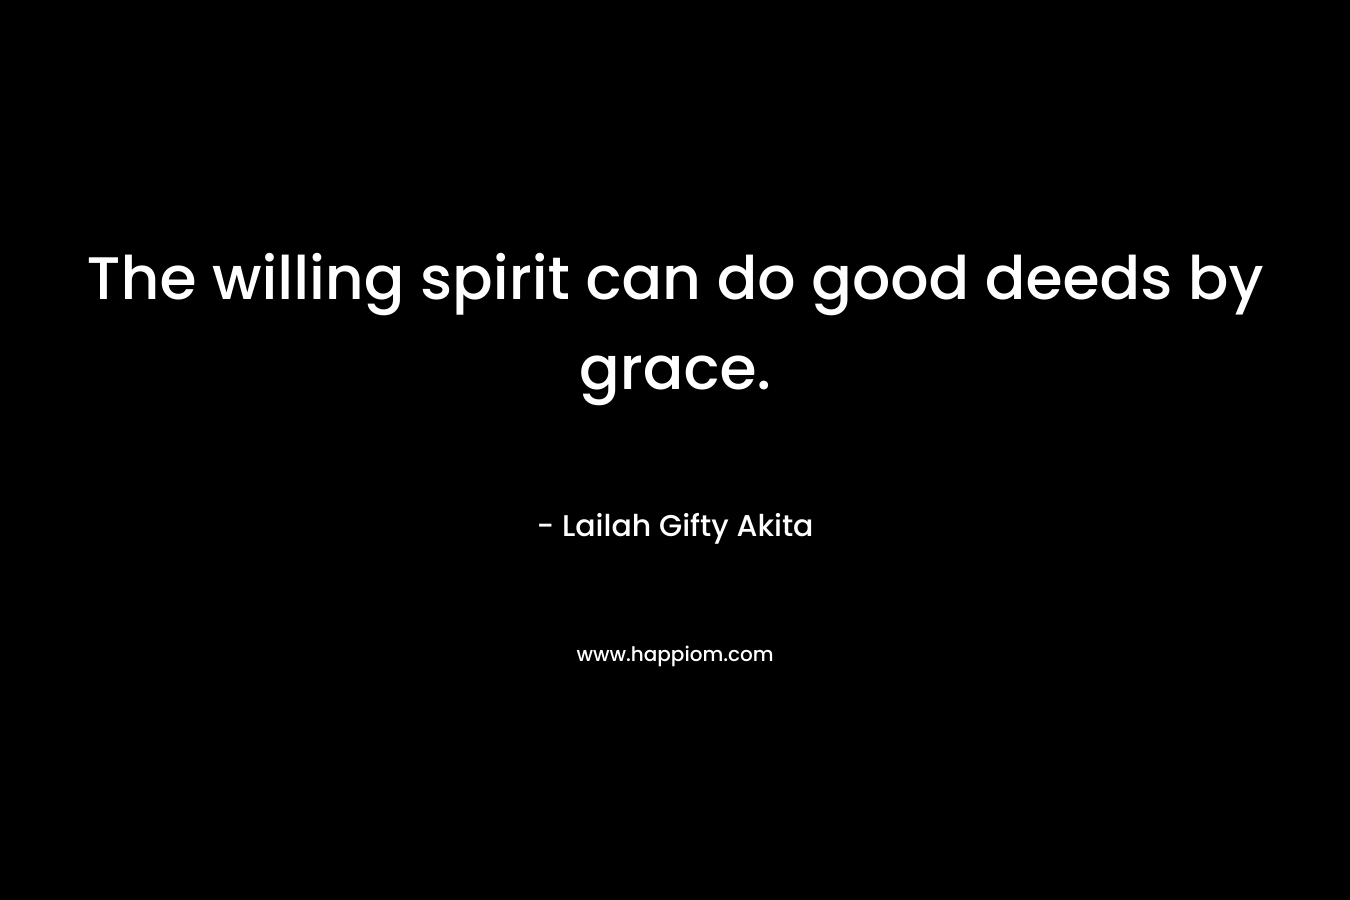 The willing spirit can do good deeds by grace.